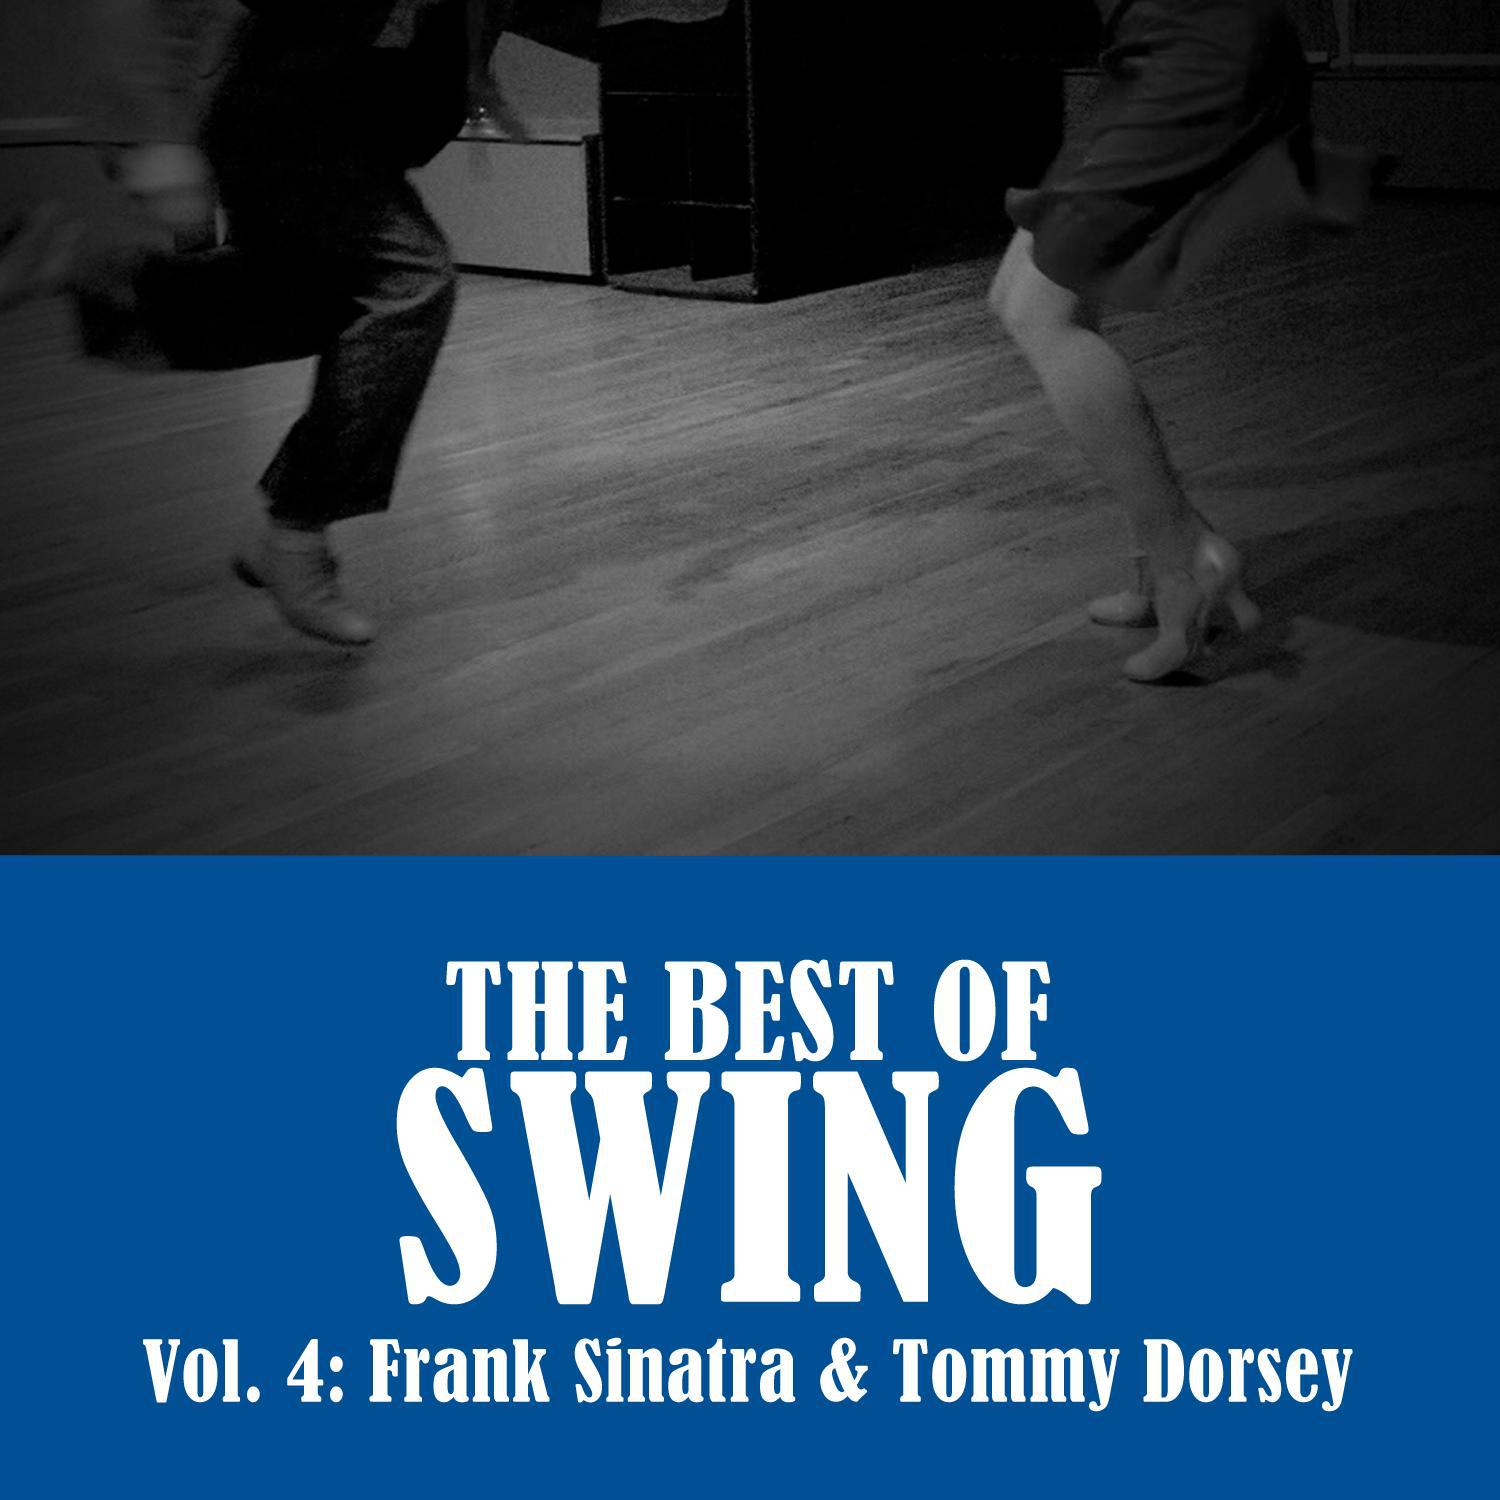 The Best of Swing, Vol. 4: Frank Sinatra & Tommy Dorsey